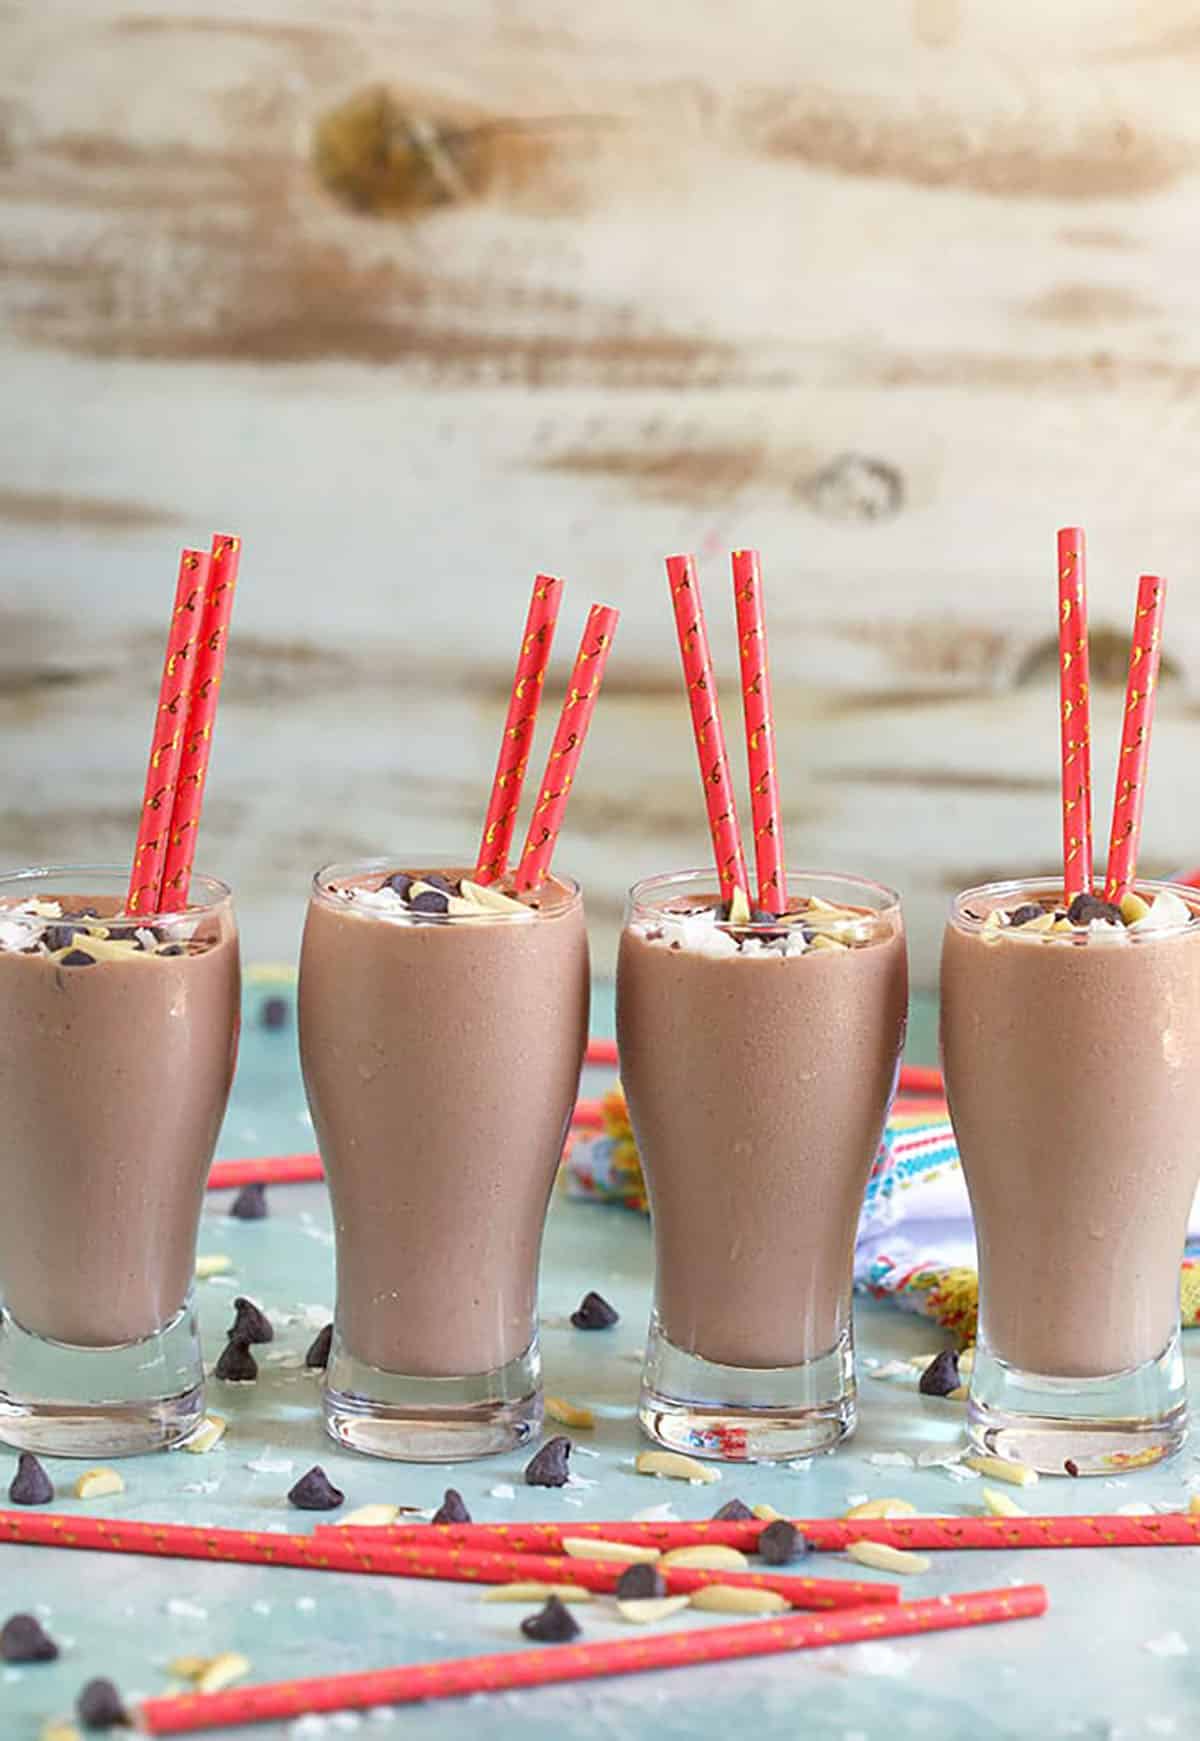 Four glasses of Chocolate Banana Smoothies on a blue background with a coral colored paper straw.